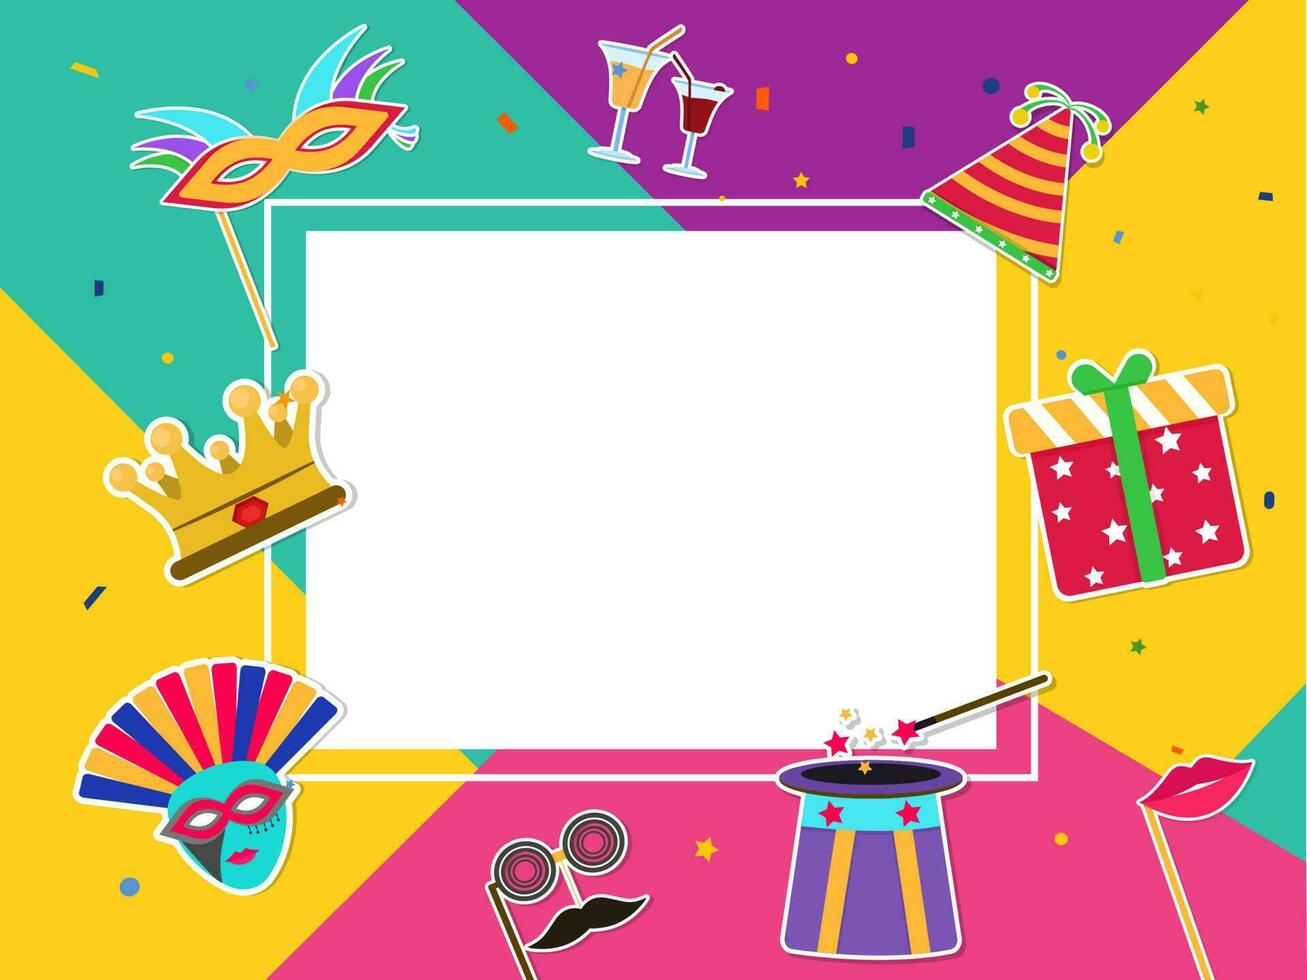 Sticker style photo booth props element decorated on colorful abstract background with space for your message. vector